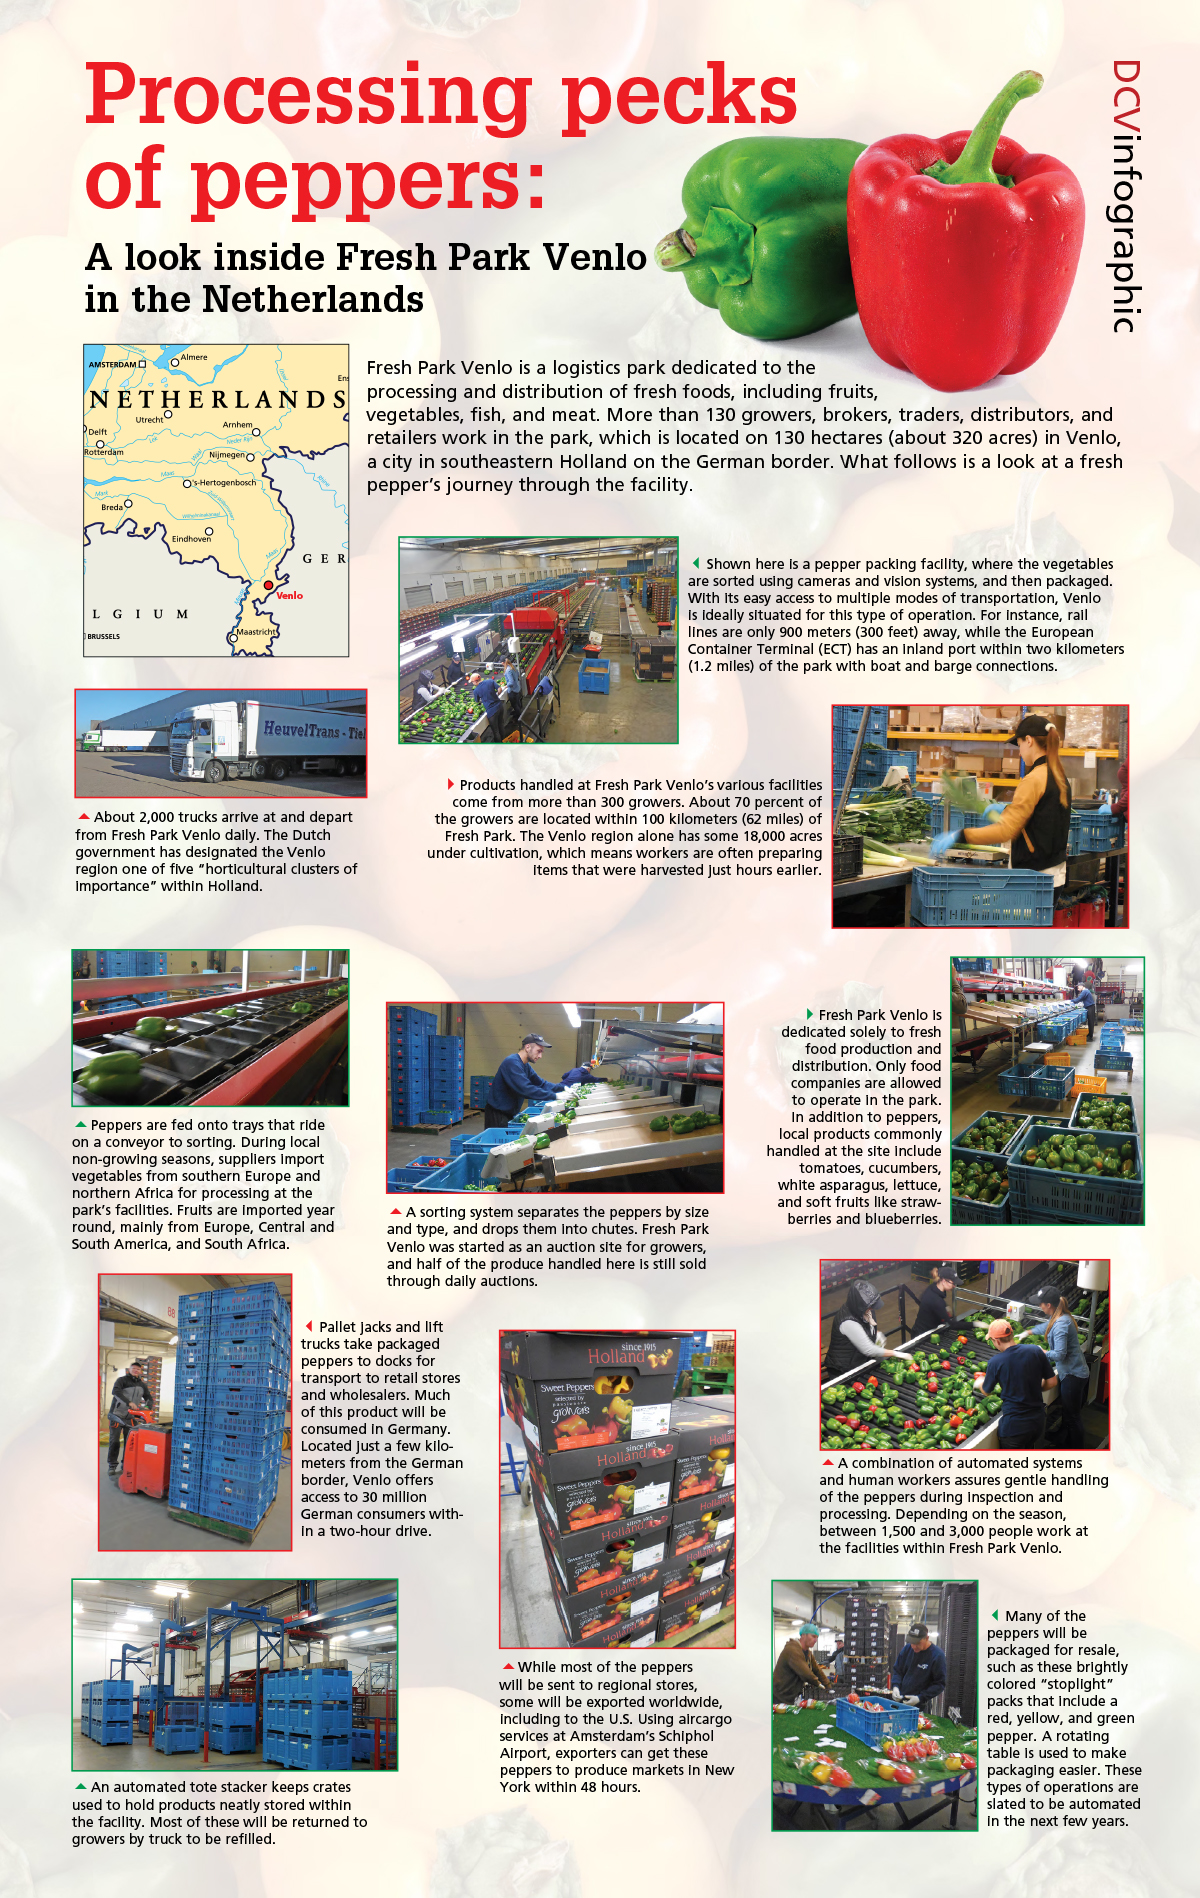 DCV Infographic: Processing pecks of peppers: A look inside Fresh Park Venlo in the Netherlands. This logistics park is dedicated to the processing and distribution of fresh foods. Here's is a look at a fresh pepper's journey through the facility.